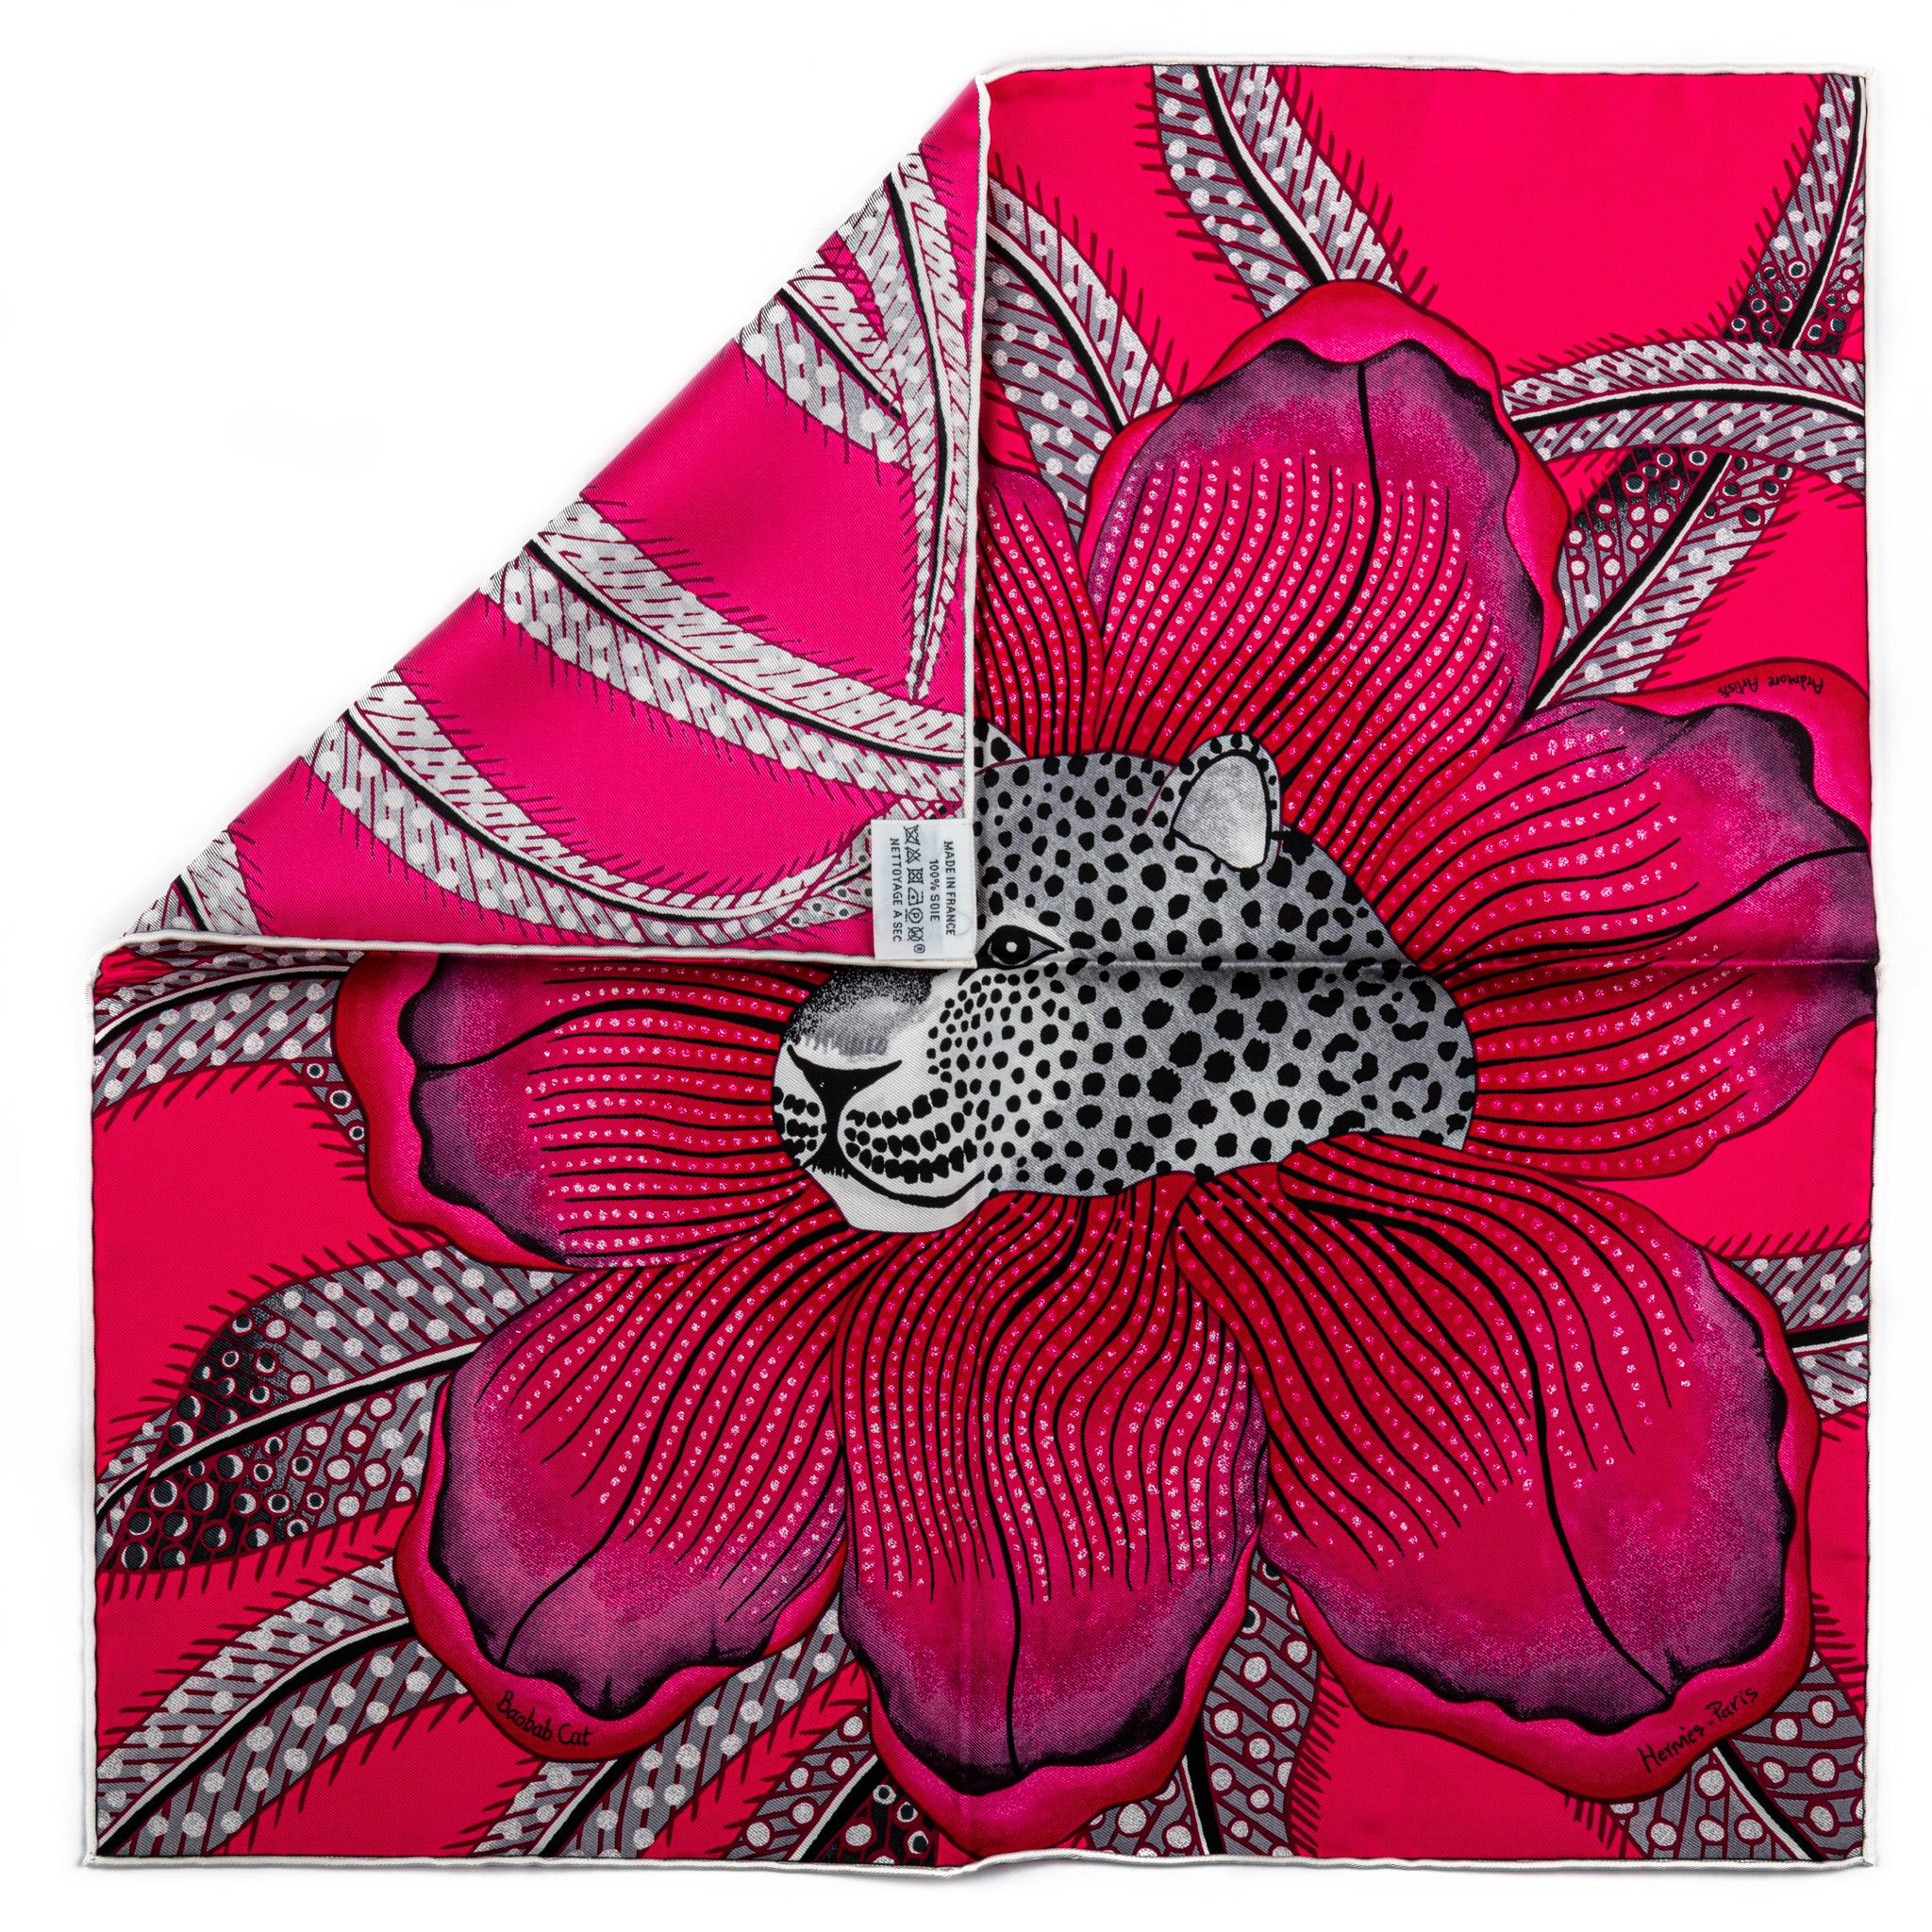 Hermès fuchsia silk Jaguar scarf with hand-rolled edges. New in box with ribbon